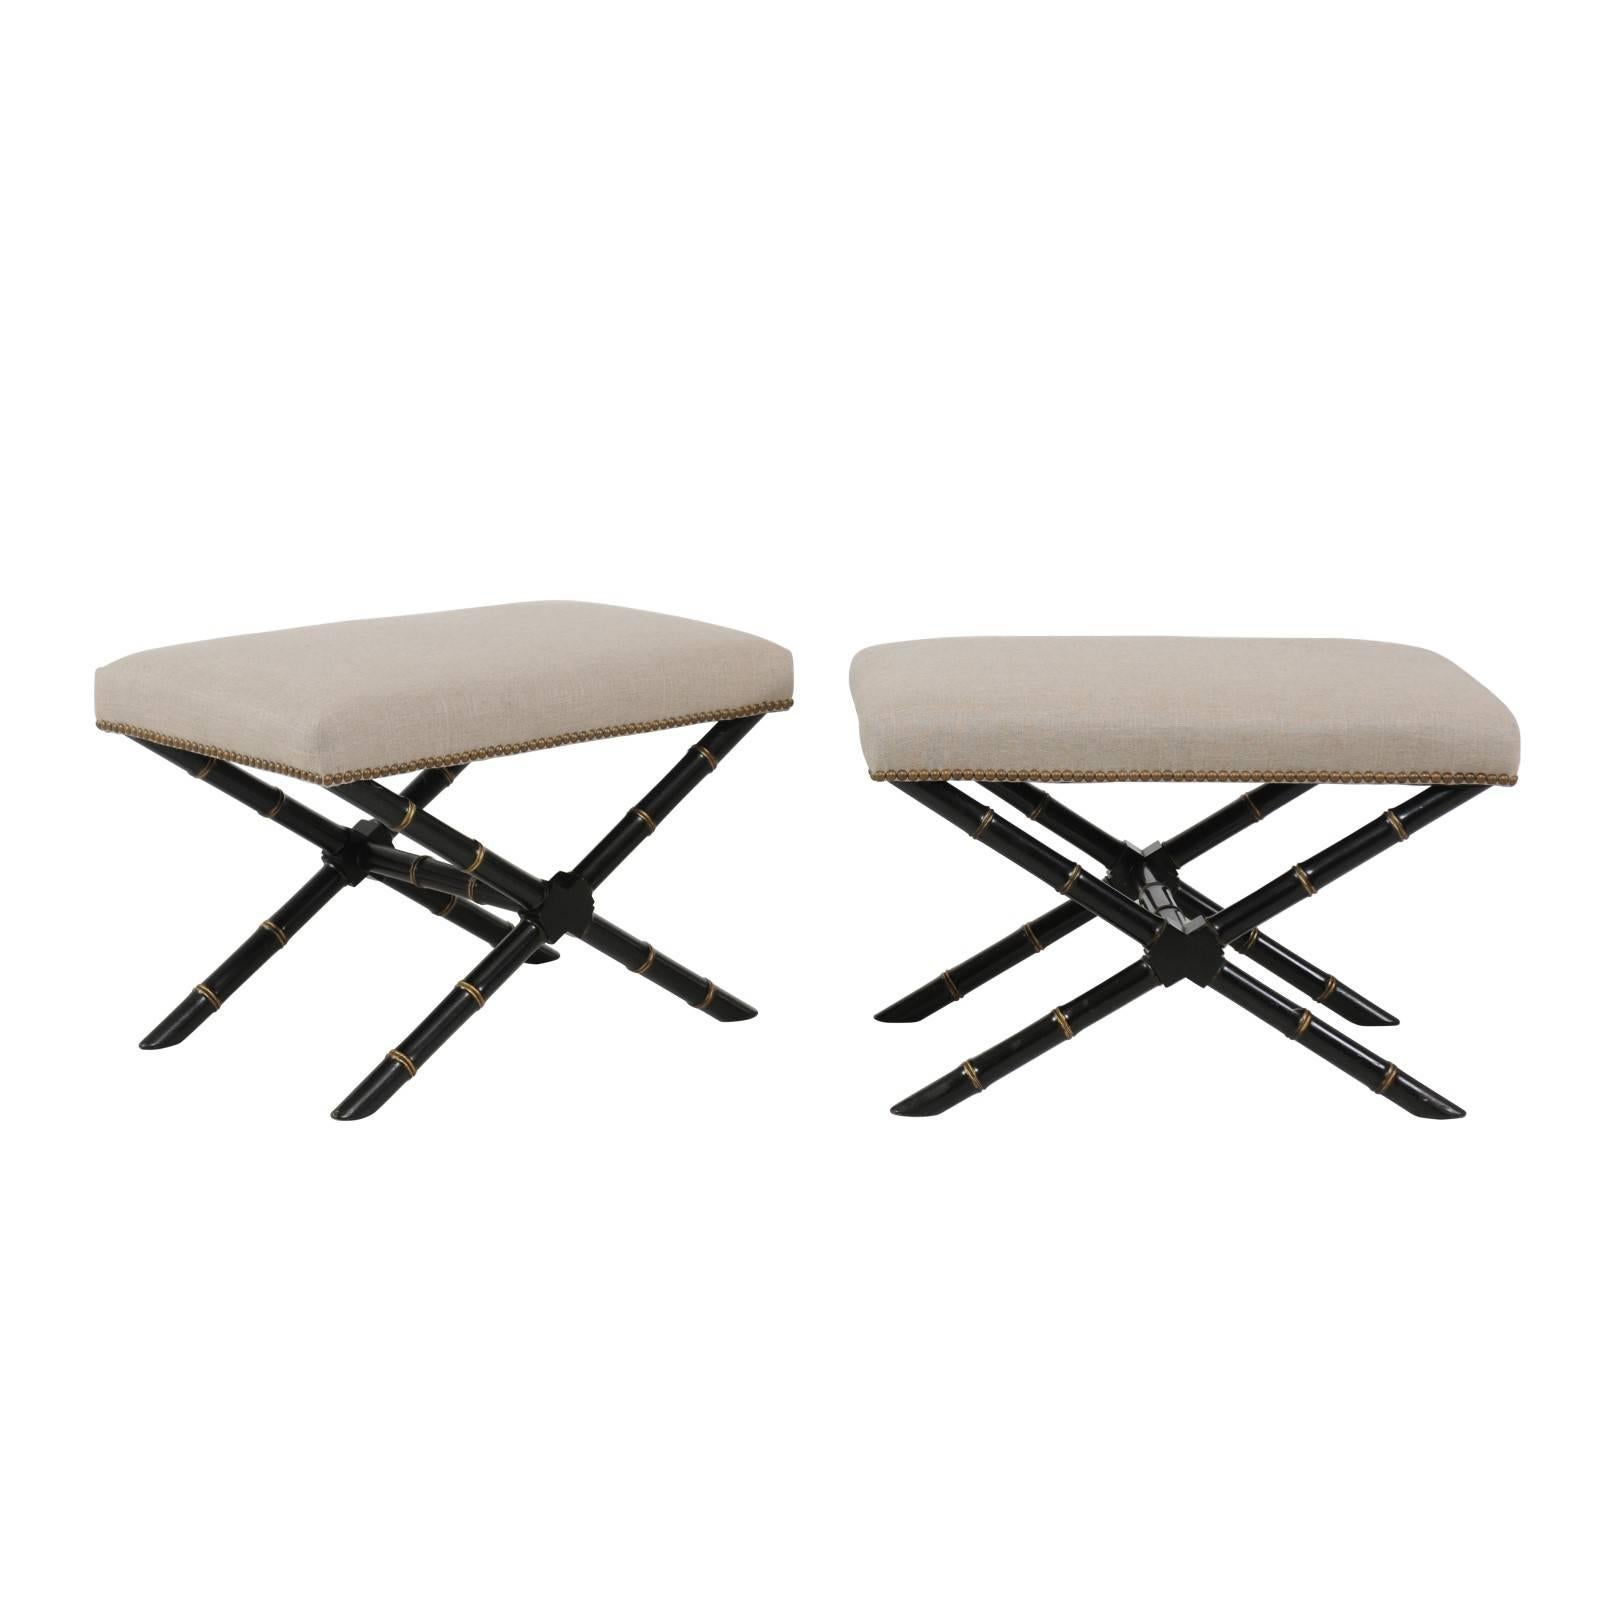 Pair of French Ebonized and Gilded Faux-Bamboo X-Form Stools, circa 1950